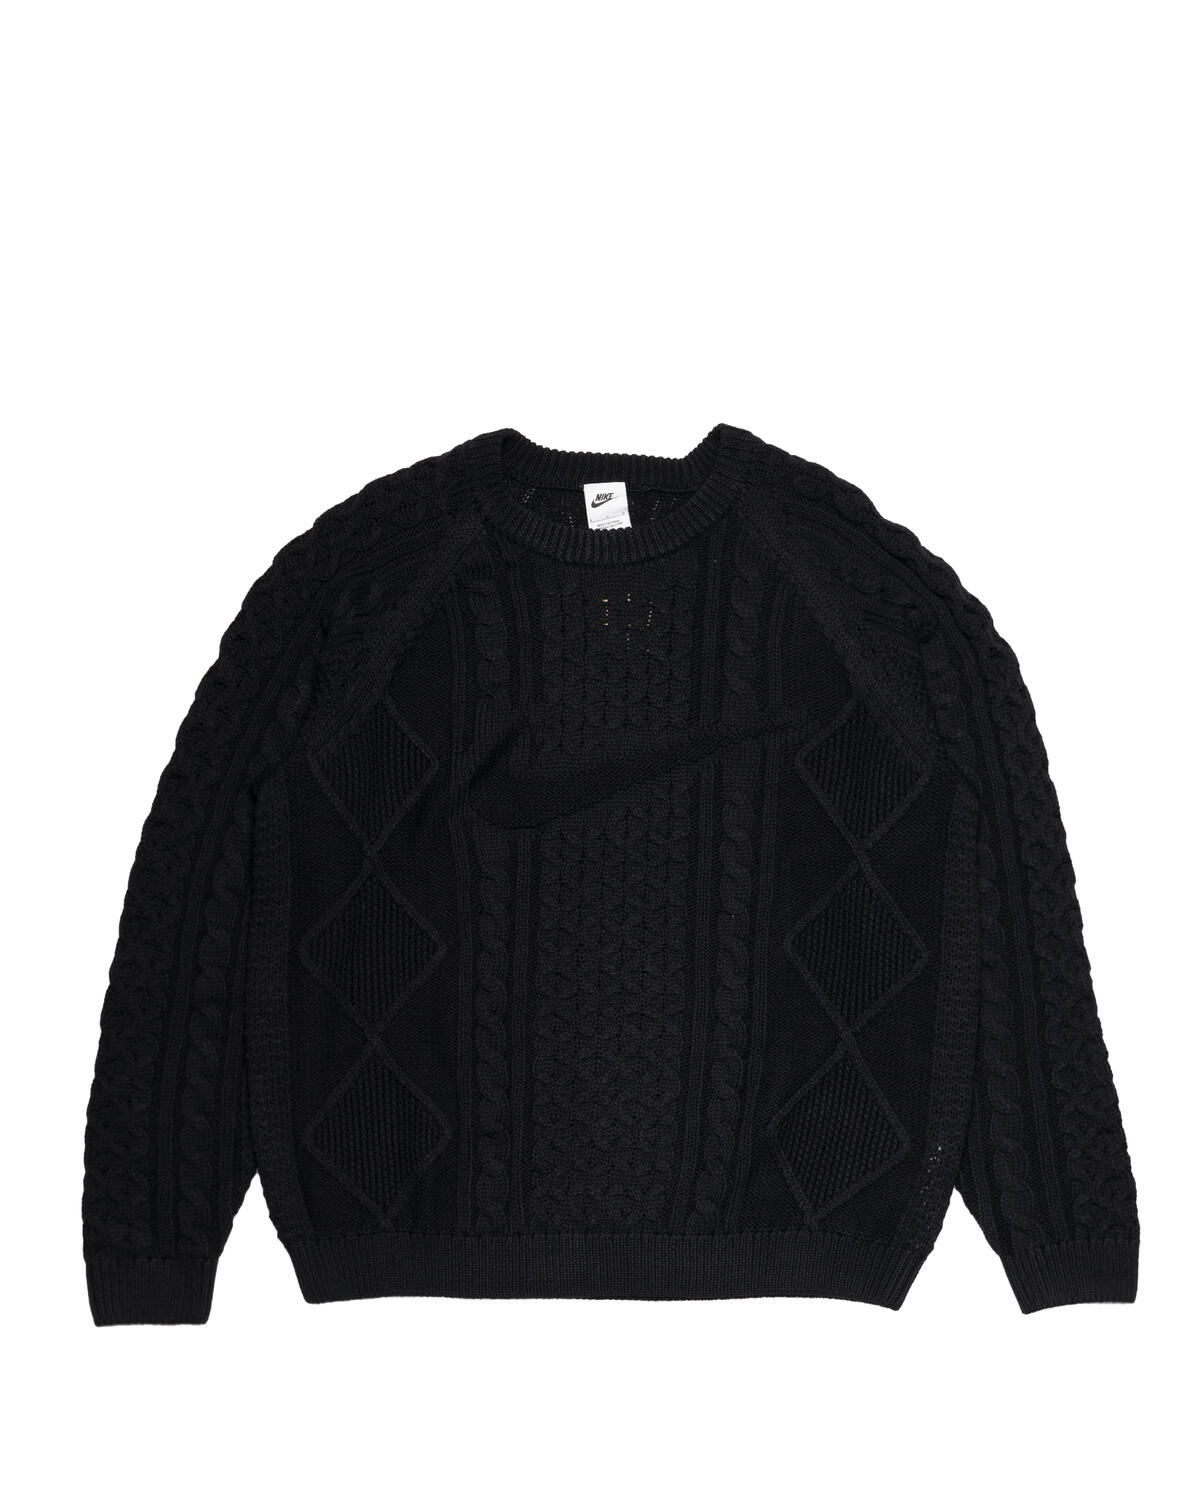 Nike CABLE KNIT SWEATER | DQ5176-010 | AFEW STORE